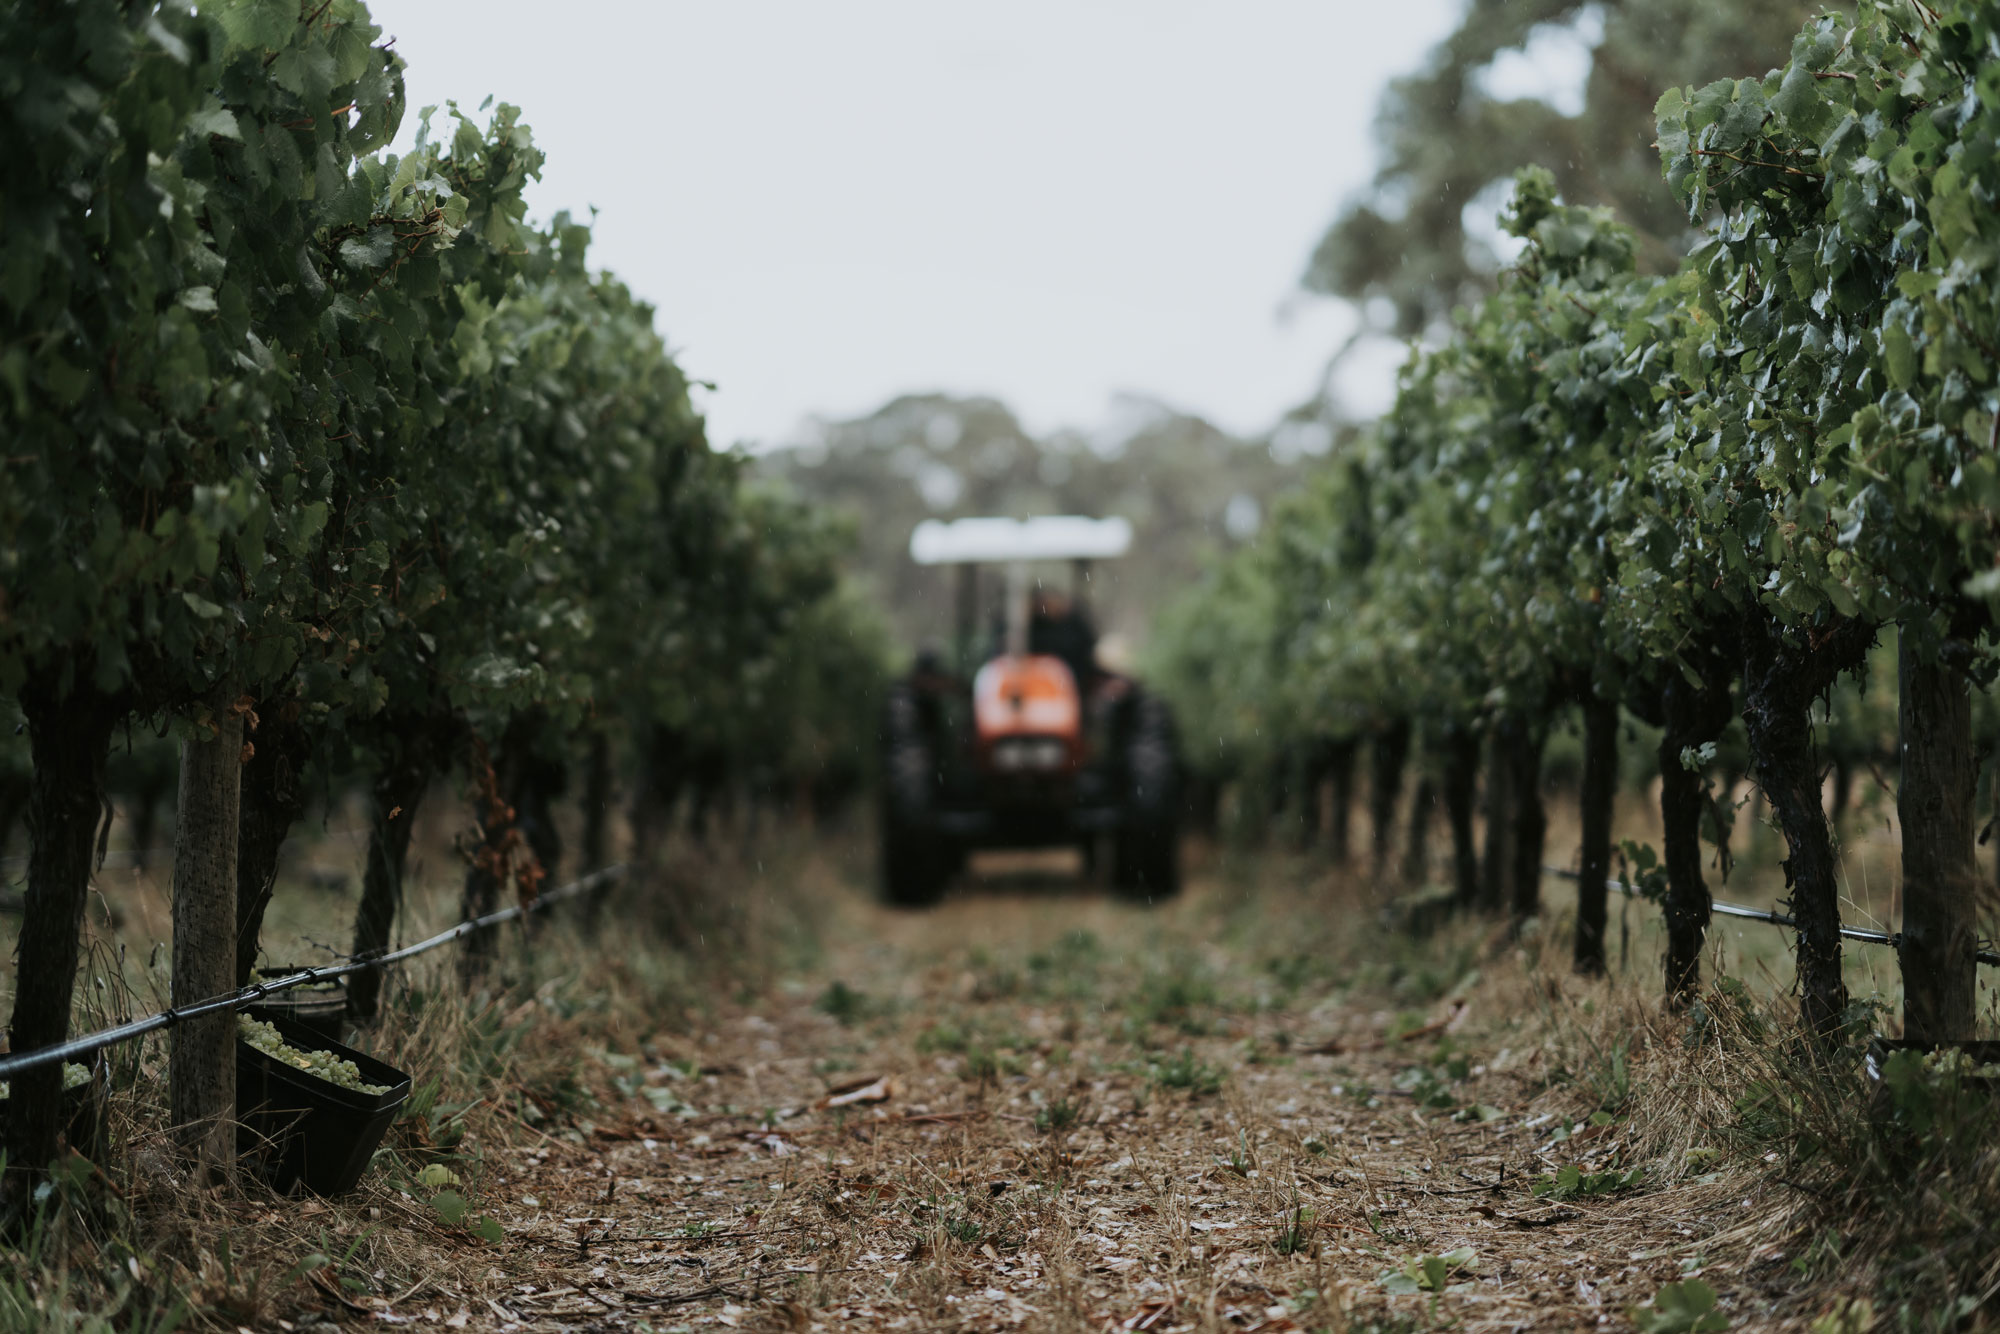 A tractor in the vineyard